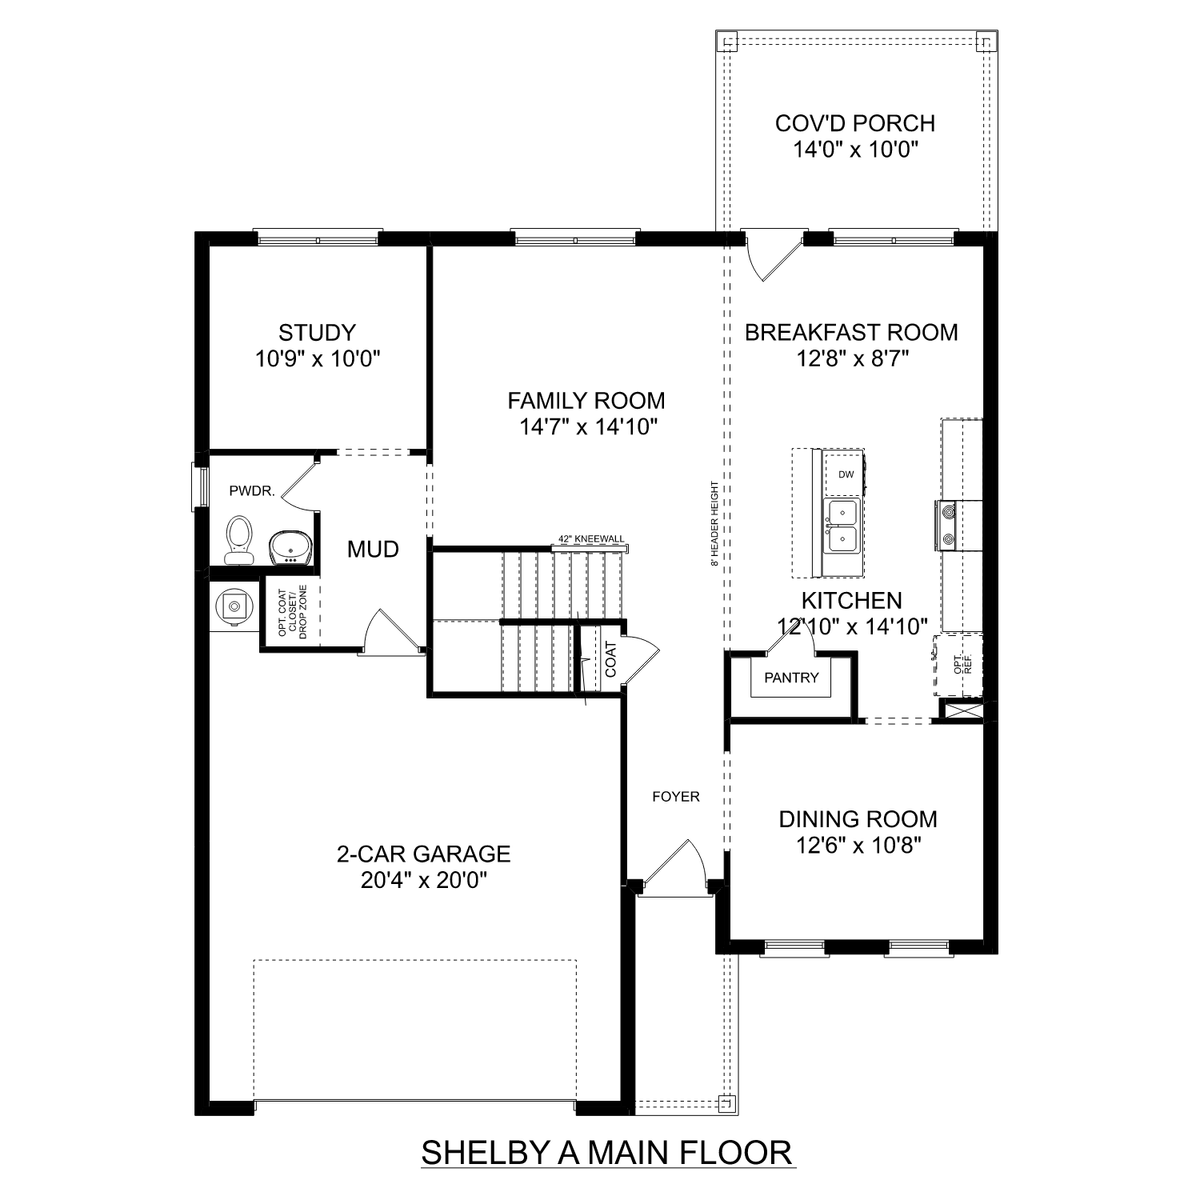 1 - The Shelby A buildable floor plan layout in Davidson Homes' Ricketts Farm community.